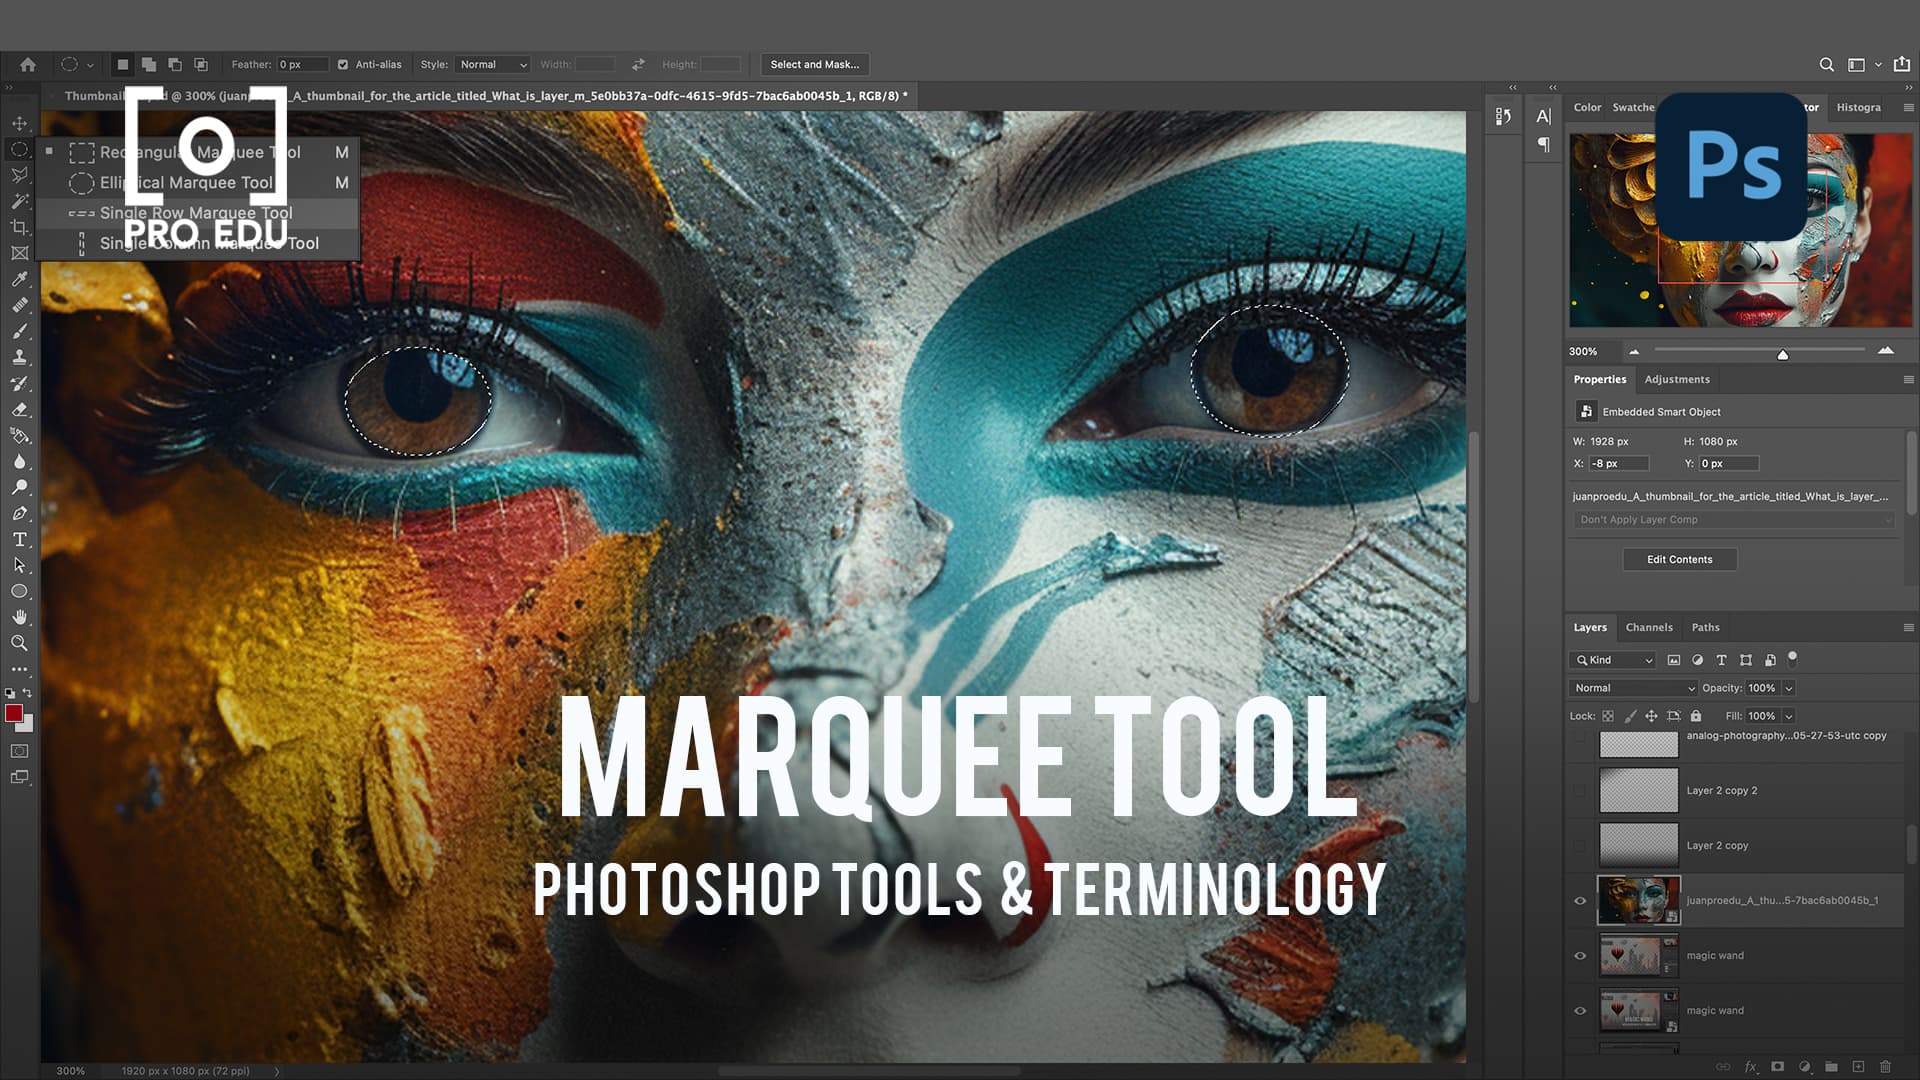 Marquee Tool Functions in Photoshop - PRO EDU Guide